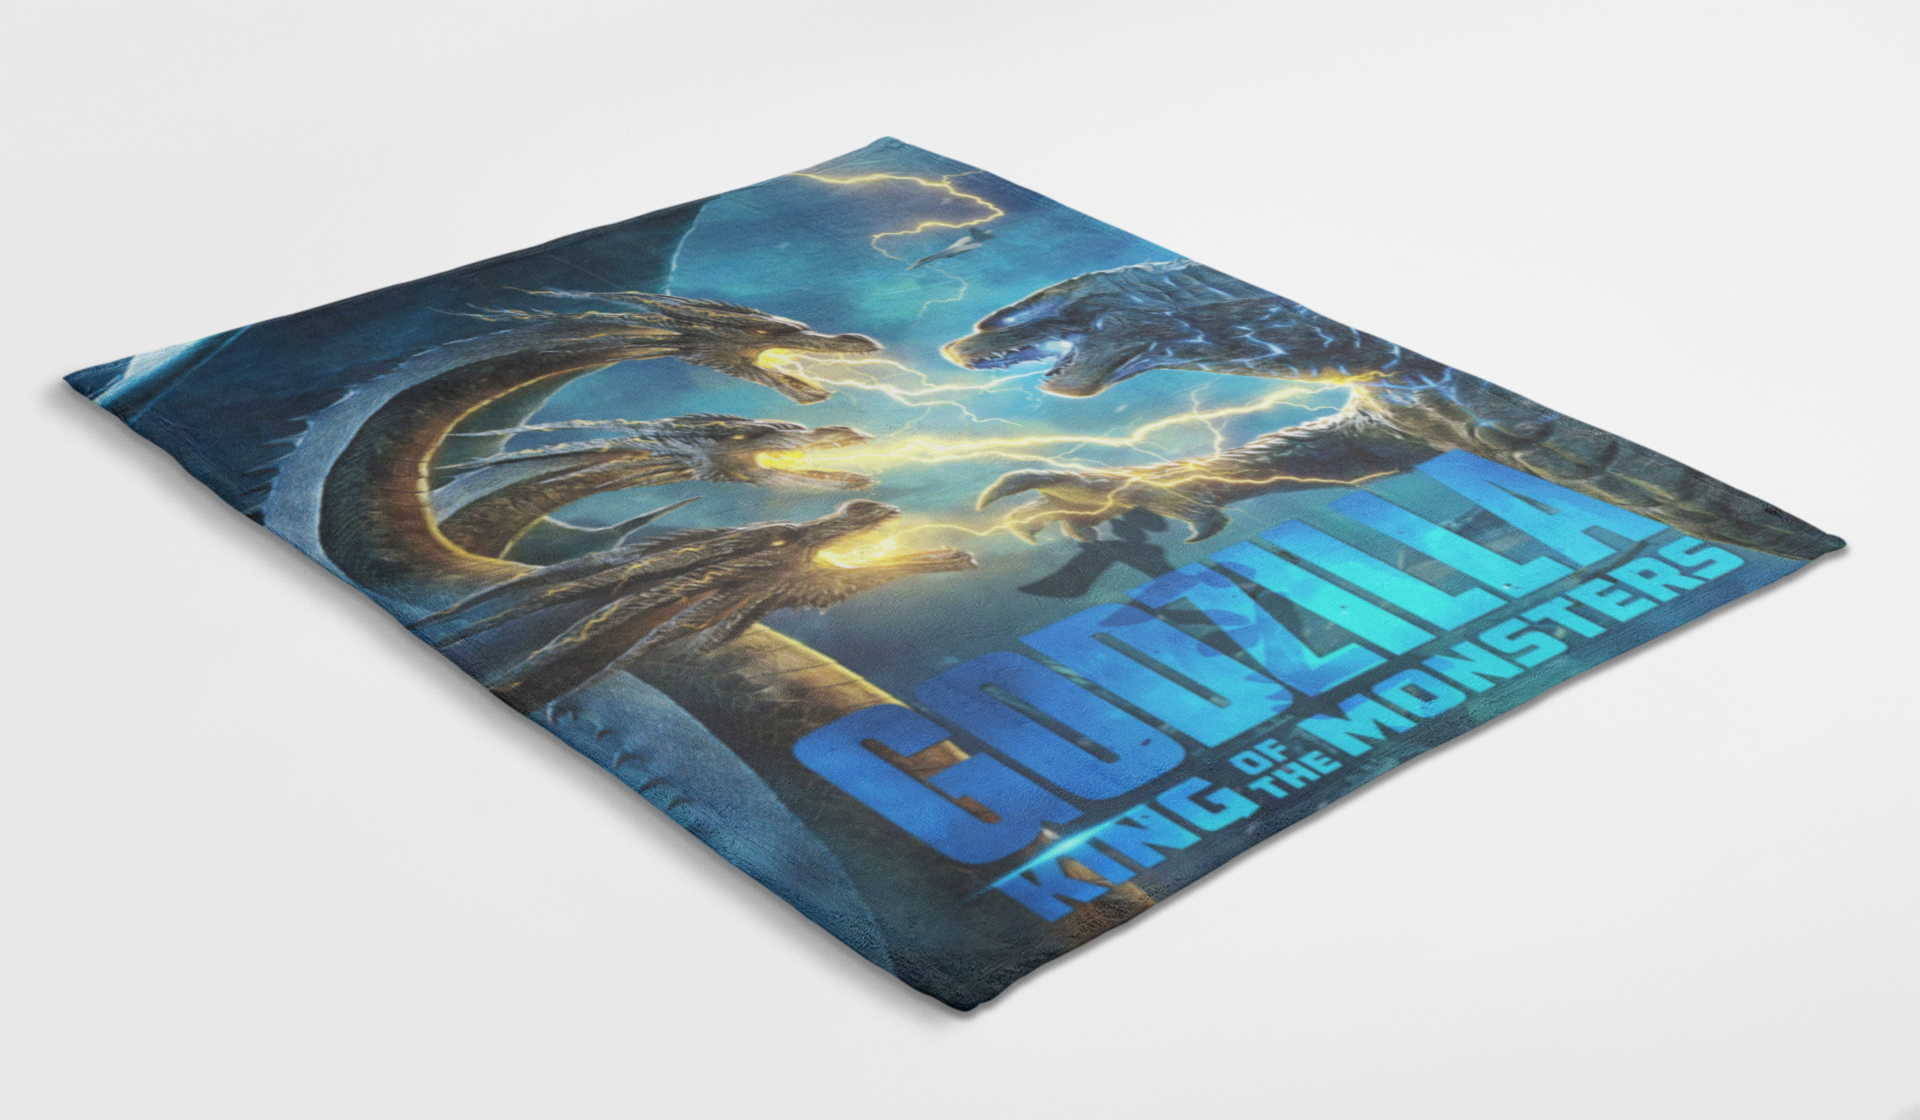 Godzilla King Of The Monsters Blanket